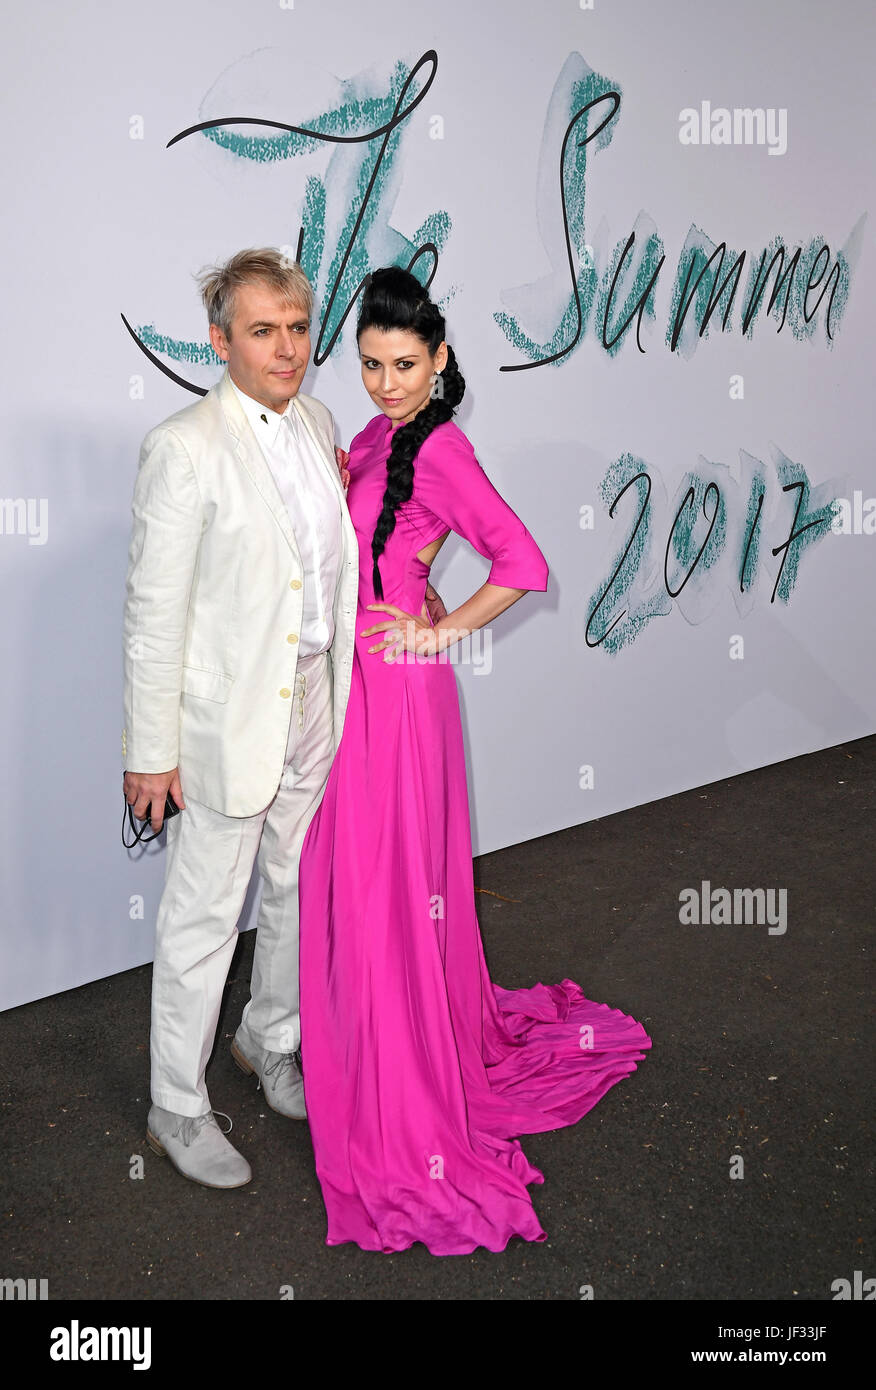 Nick Rhodes and Nefer Suvio attending the Serpentine Summer Party 2017, presented by the Serpentine and Chanel, held at the Serpentine Galleries Pavilion, in Kensington Gardens, London. Stock Photo